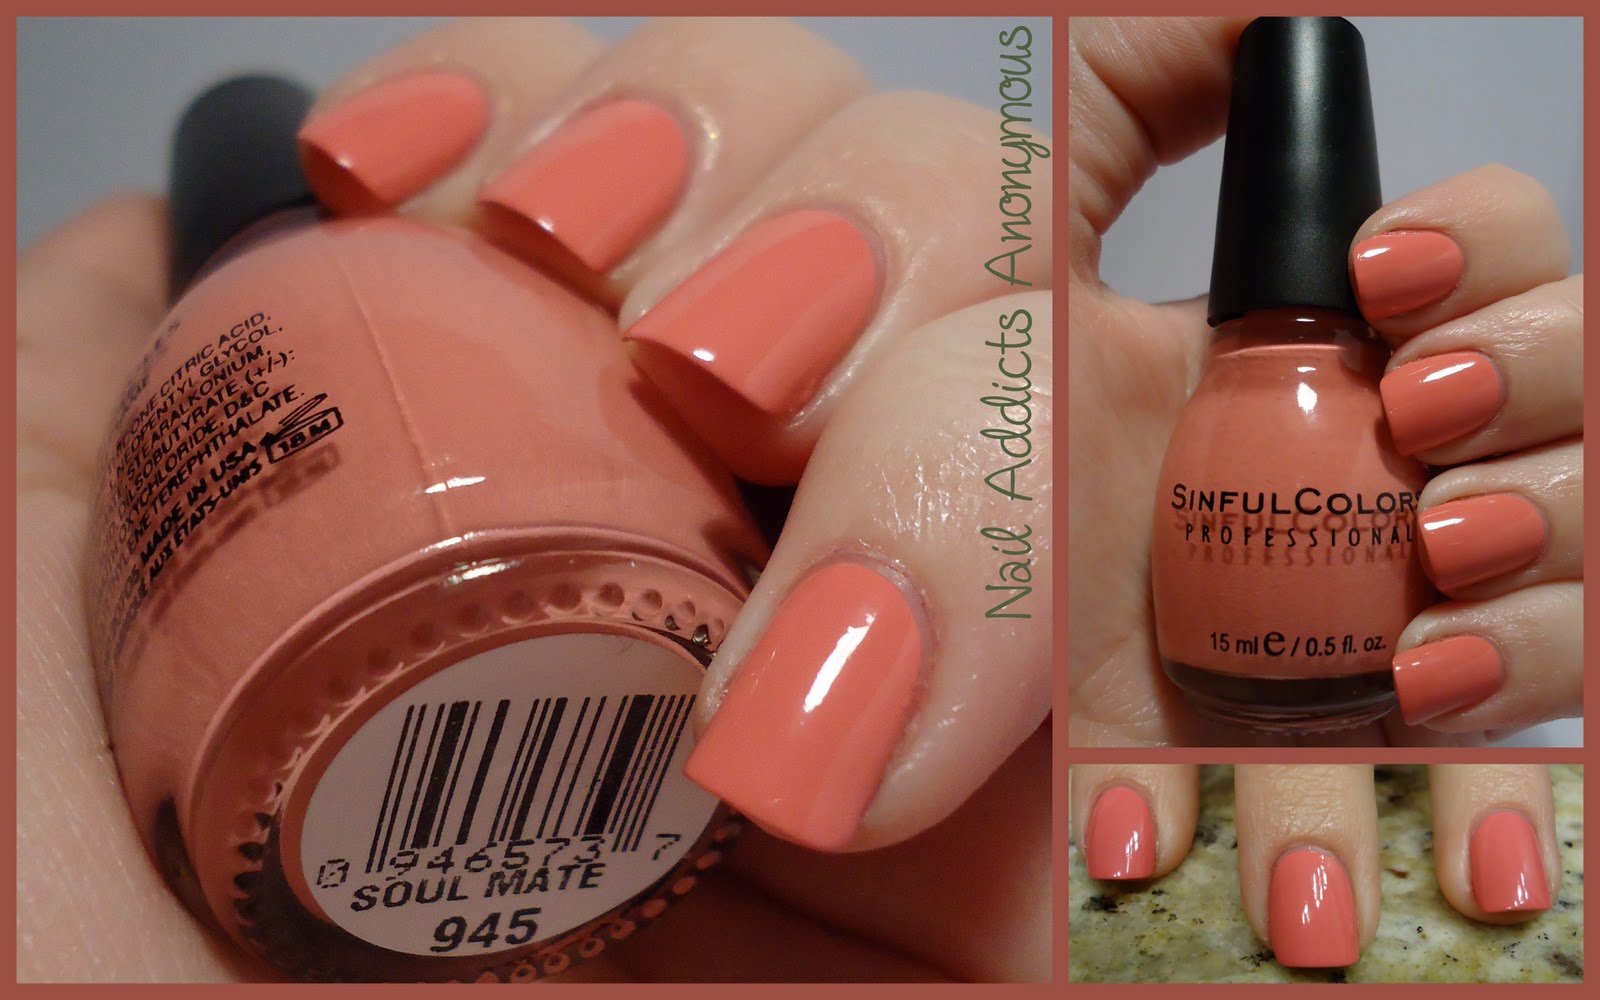 Sinful Colors Professional Nail Polish, Soul Mate - wide 1